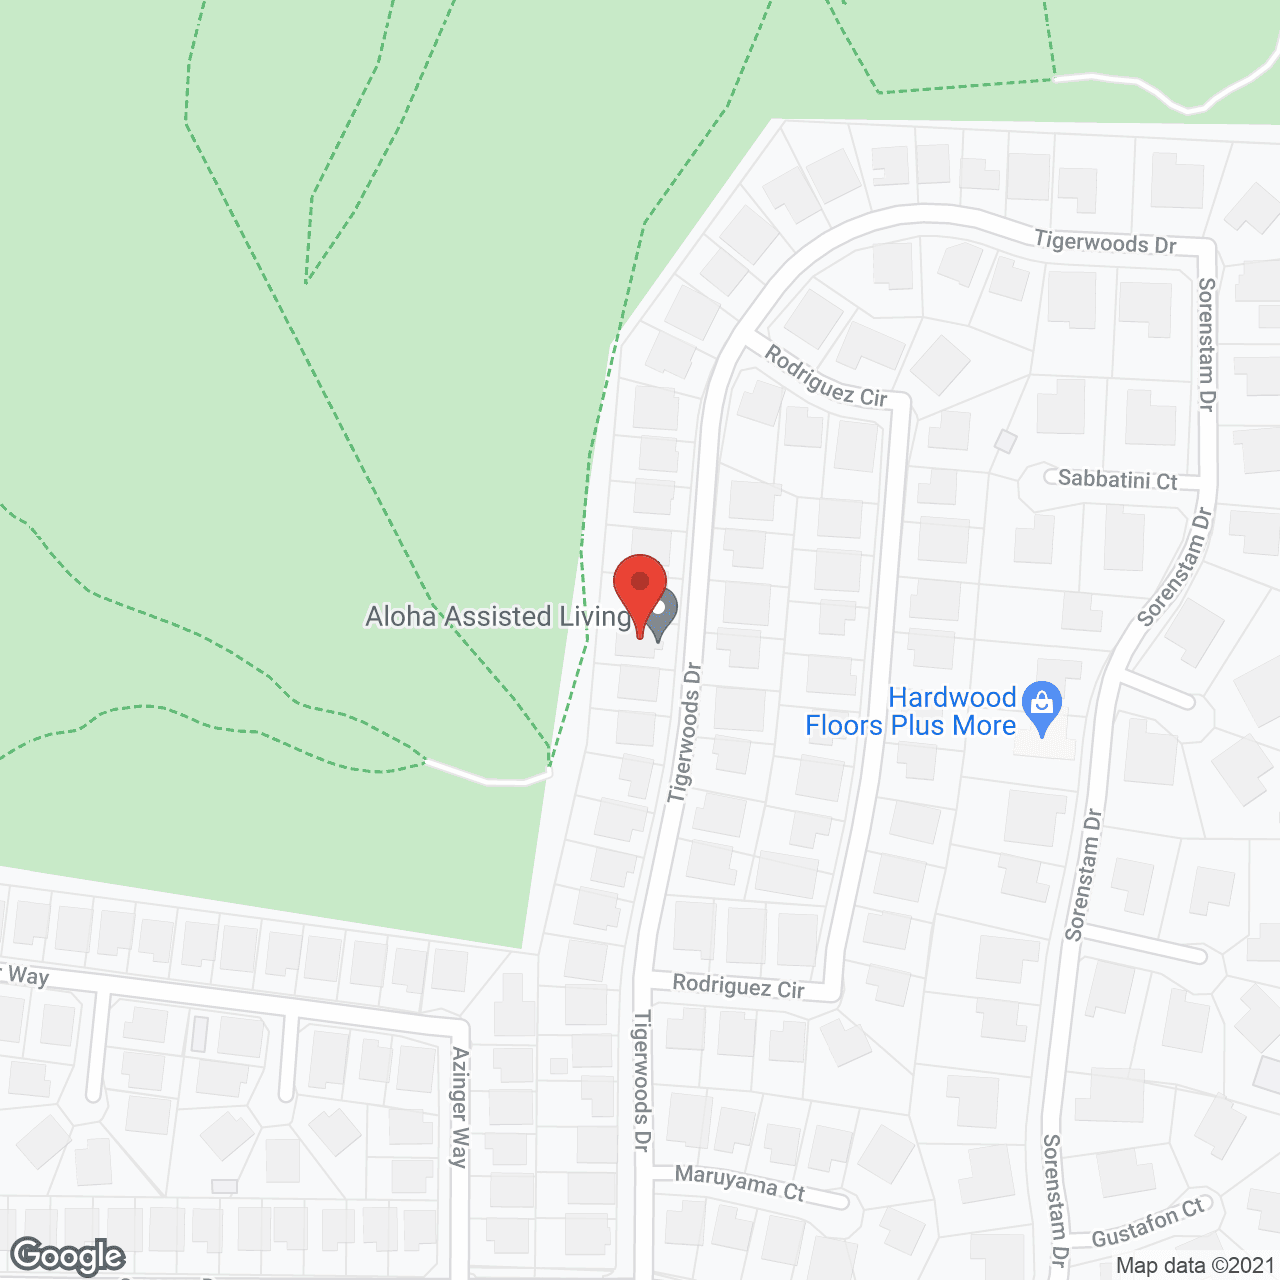 Aloha Assisted Living in google map